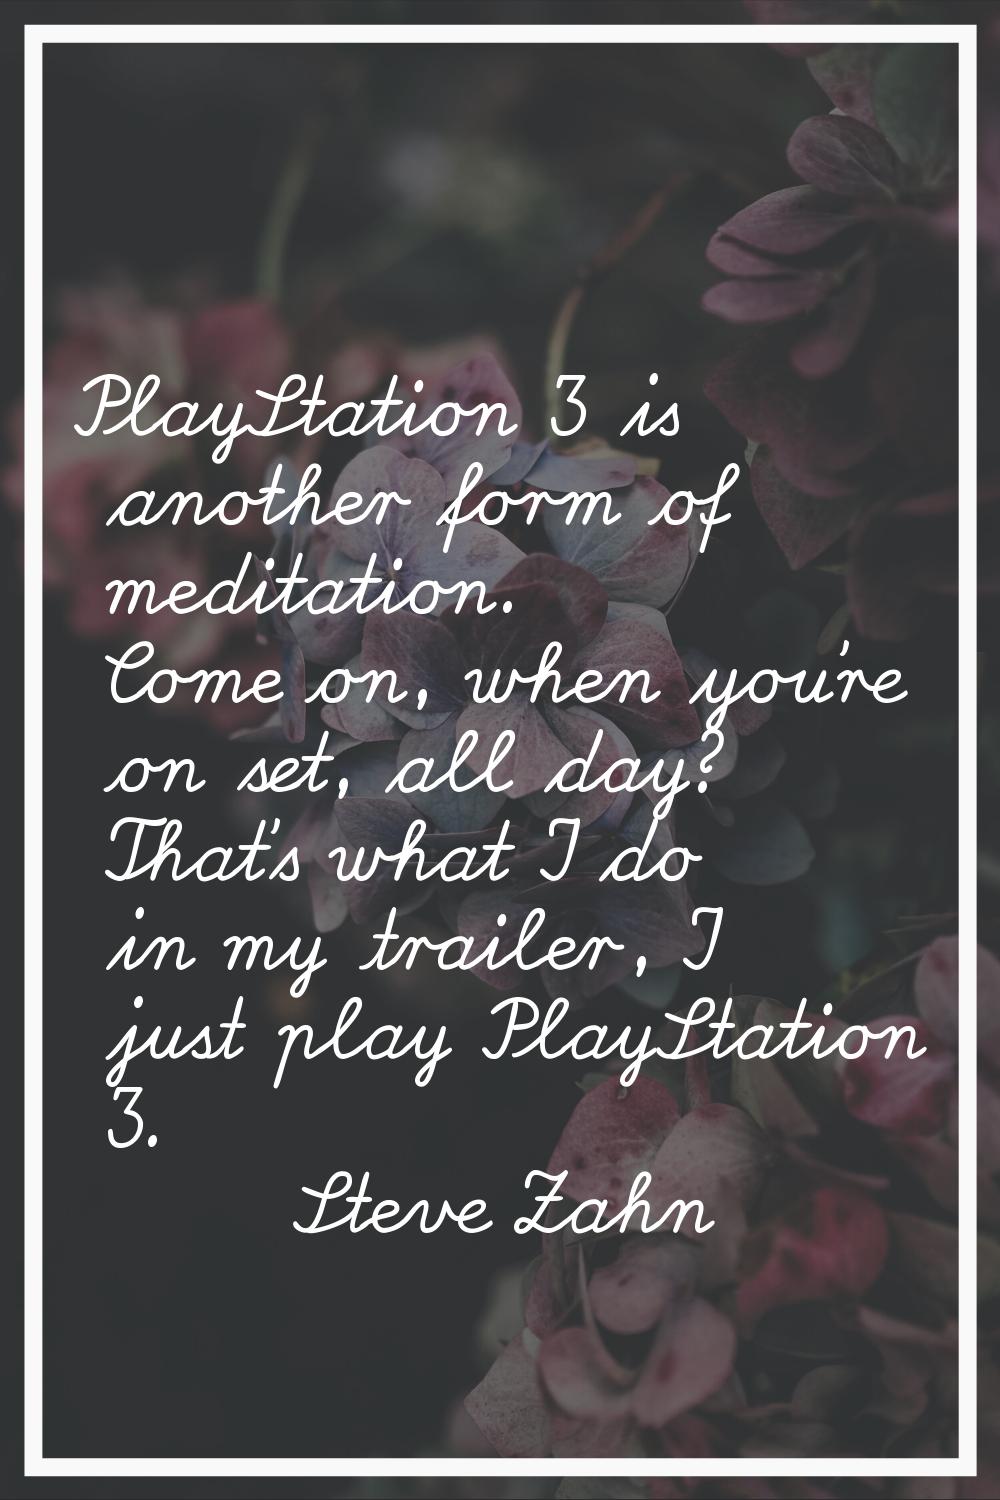 PlayStation 3 is another form of meditation. Come on, when you're on set, all day? That's what I do